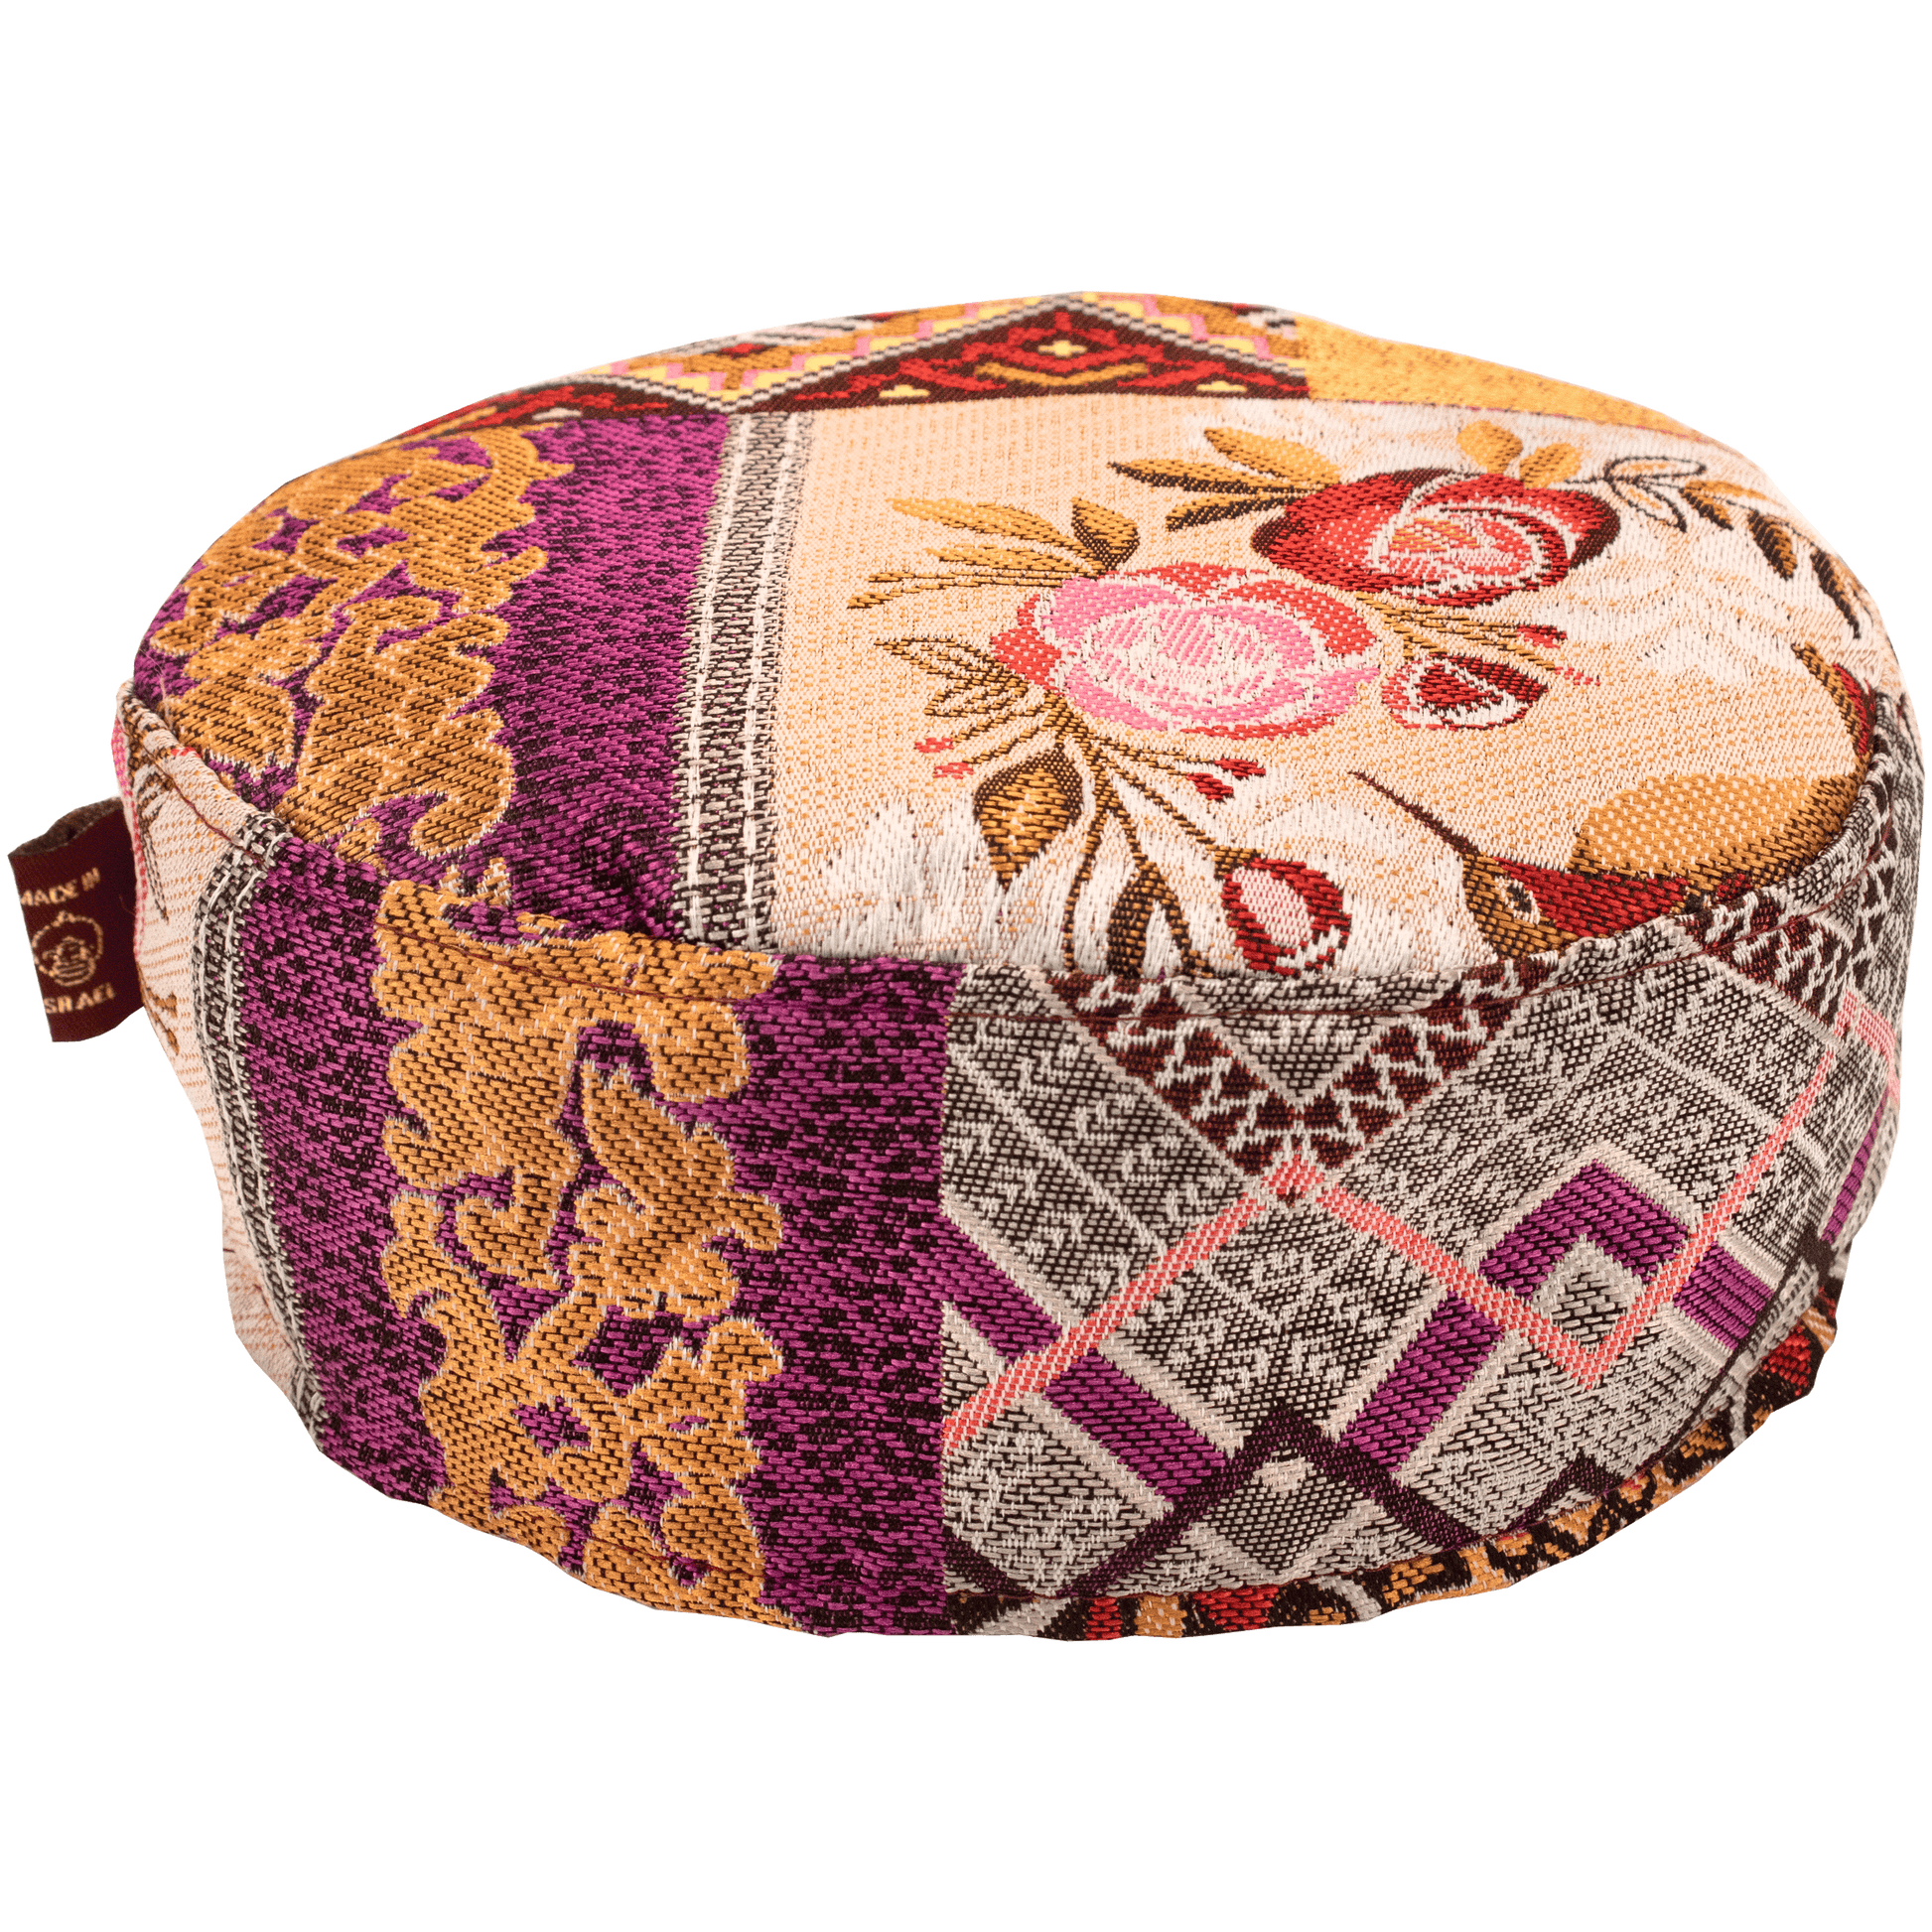 Handcrafted maroon floral patchwork Kippah with maroon and peach hue multi-pattern patchwork